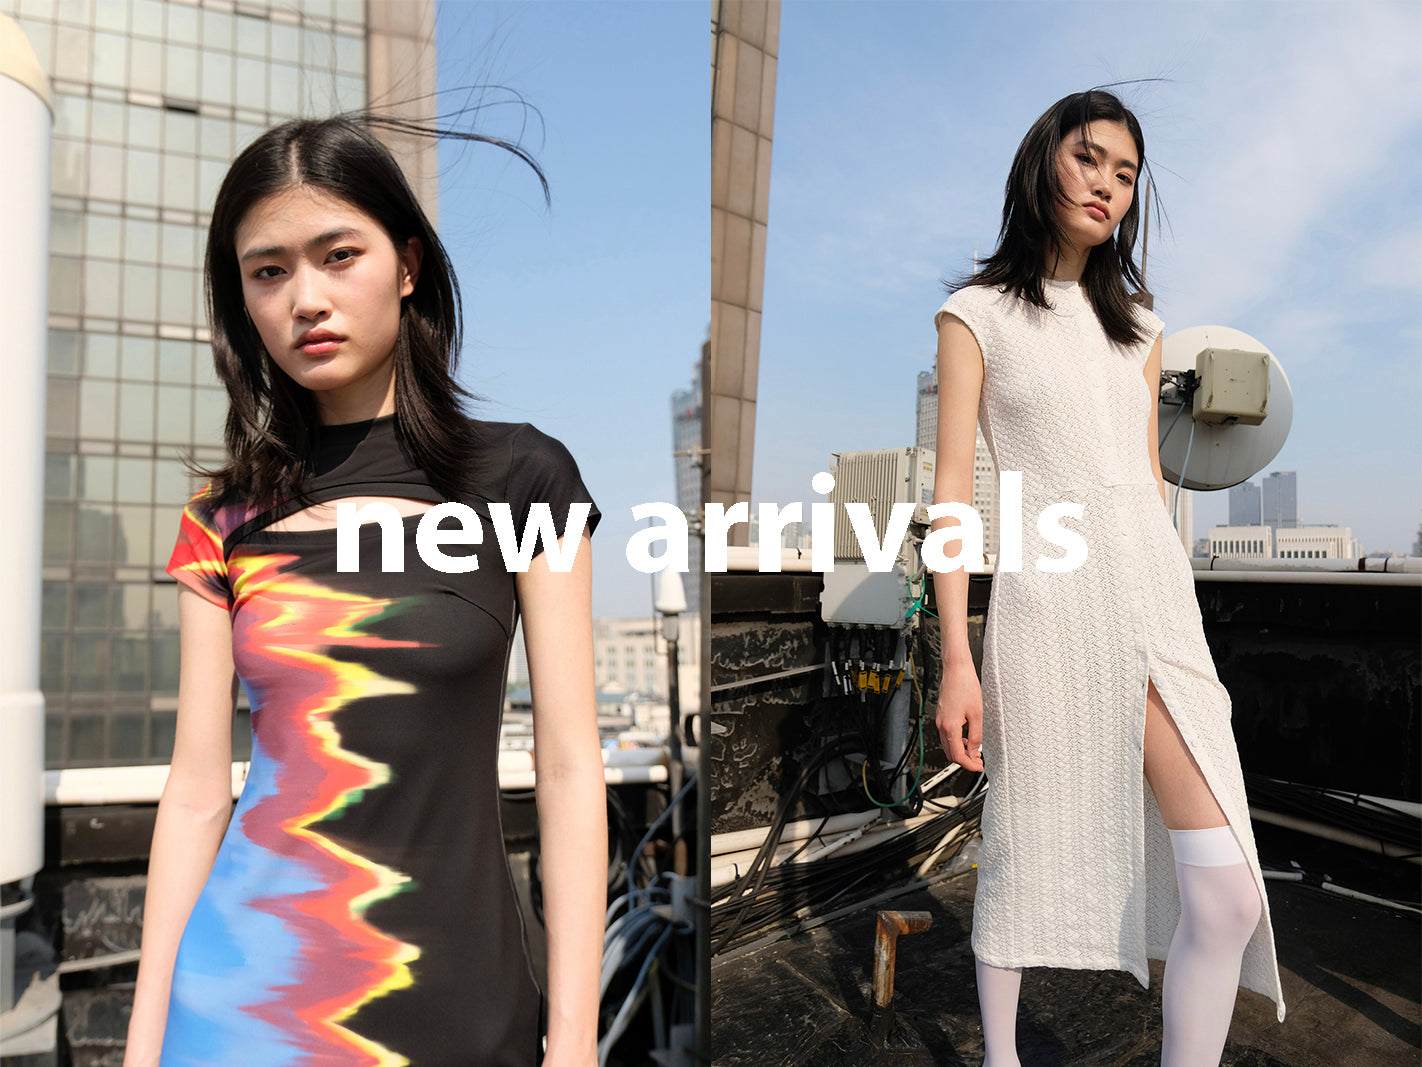 Future Fusion Online - New Arrivals from Hol!day